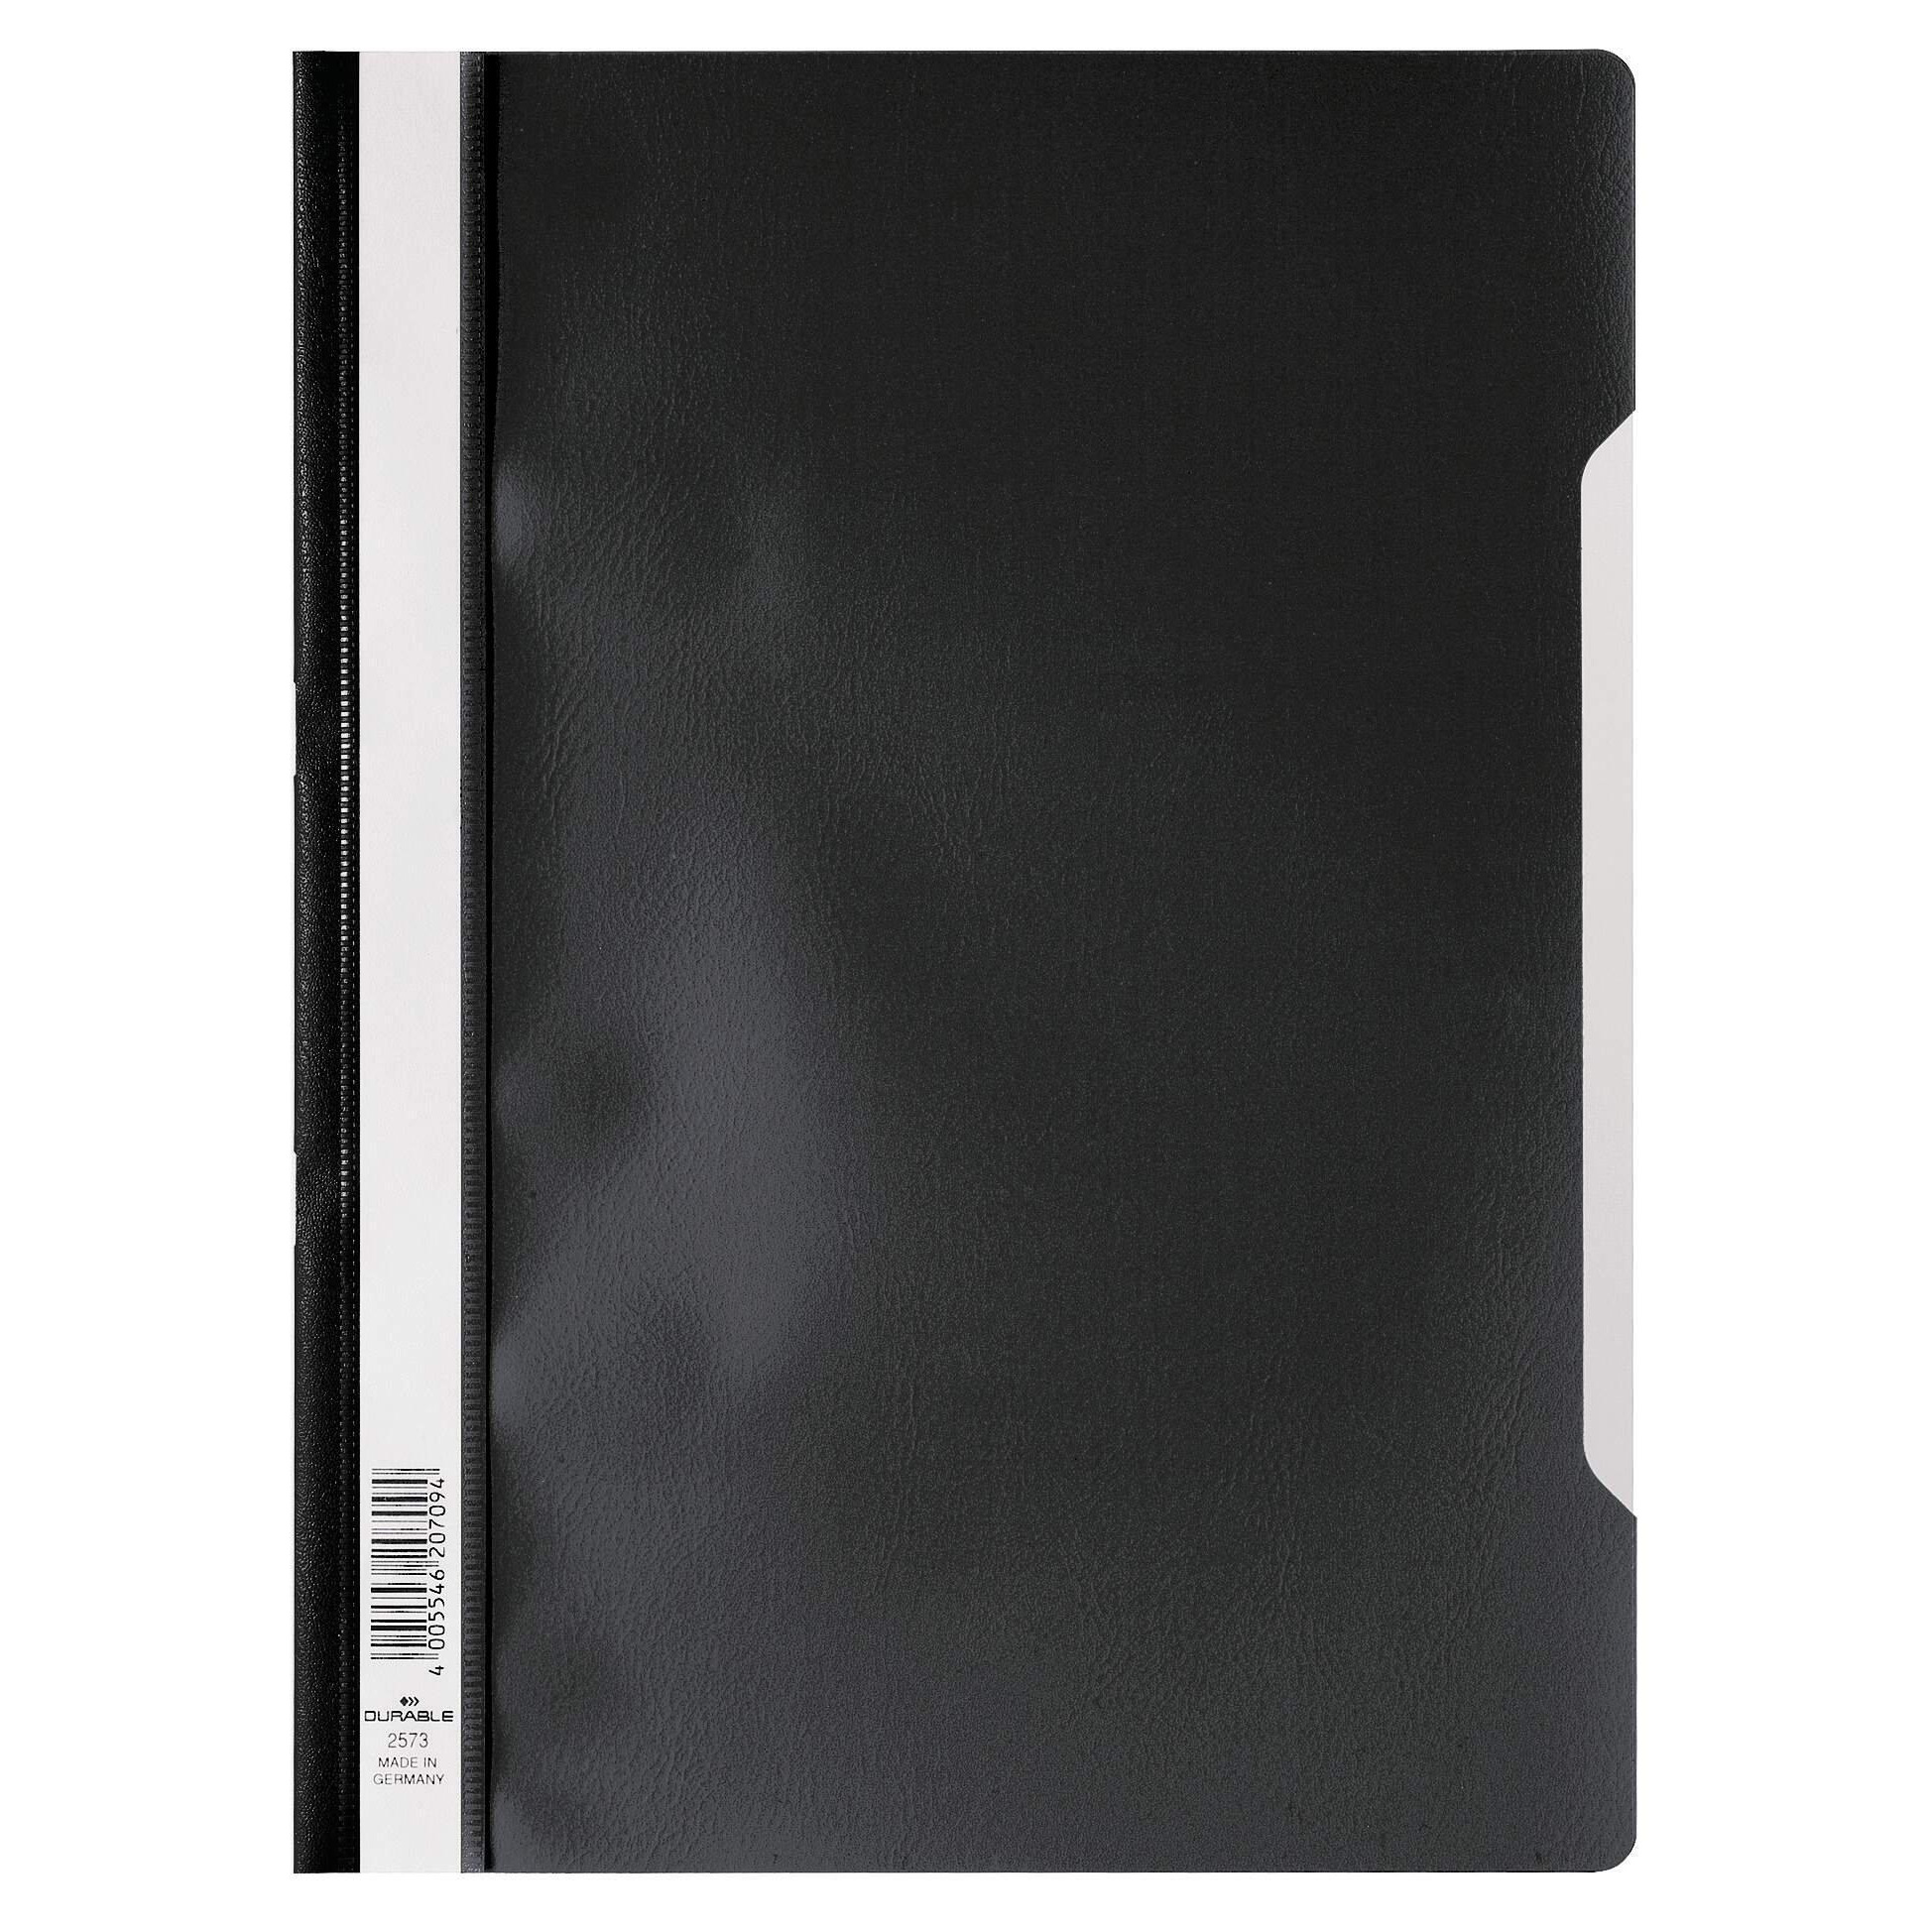 Clear View Project Folder Document Report File - 25 Pack - A4 Black - image 1